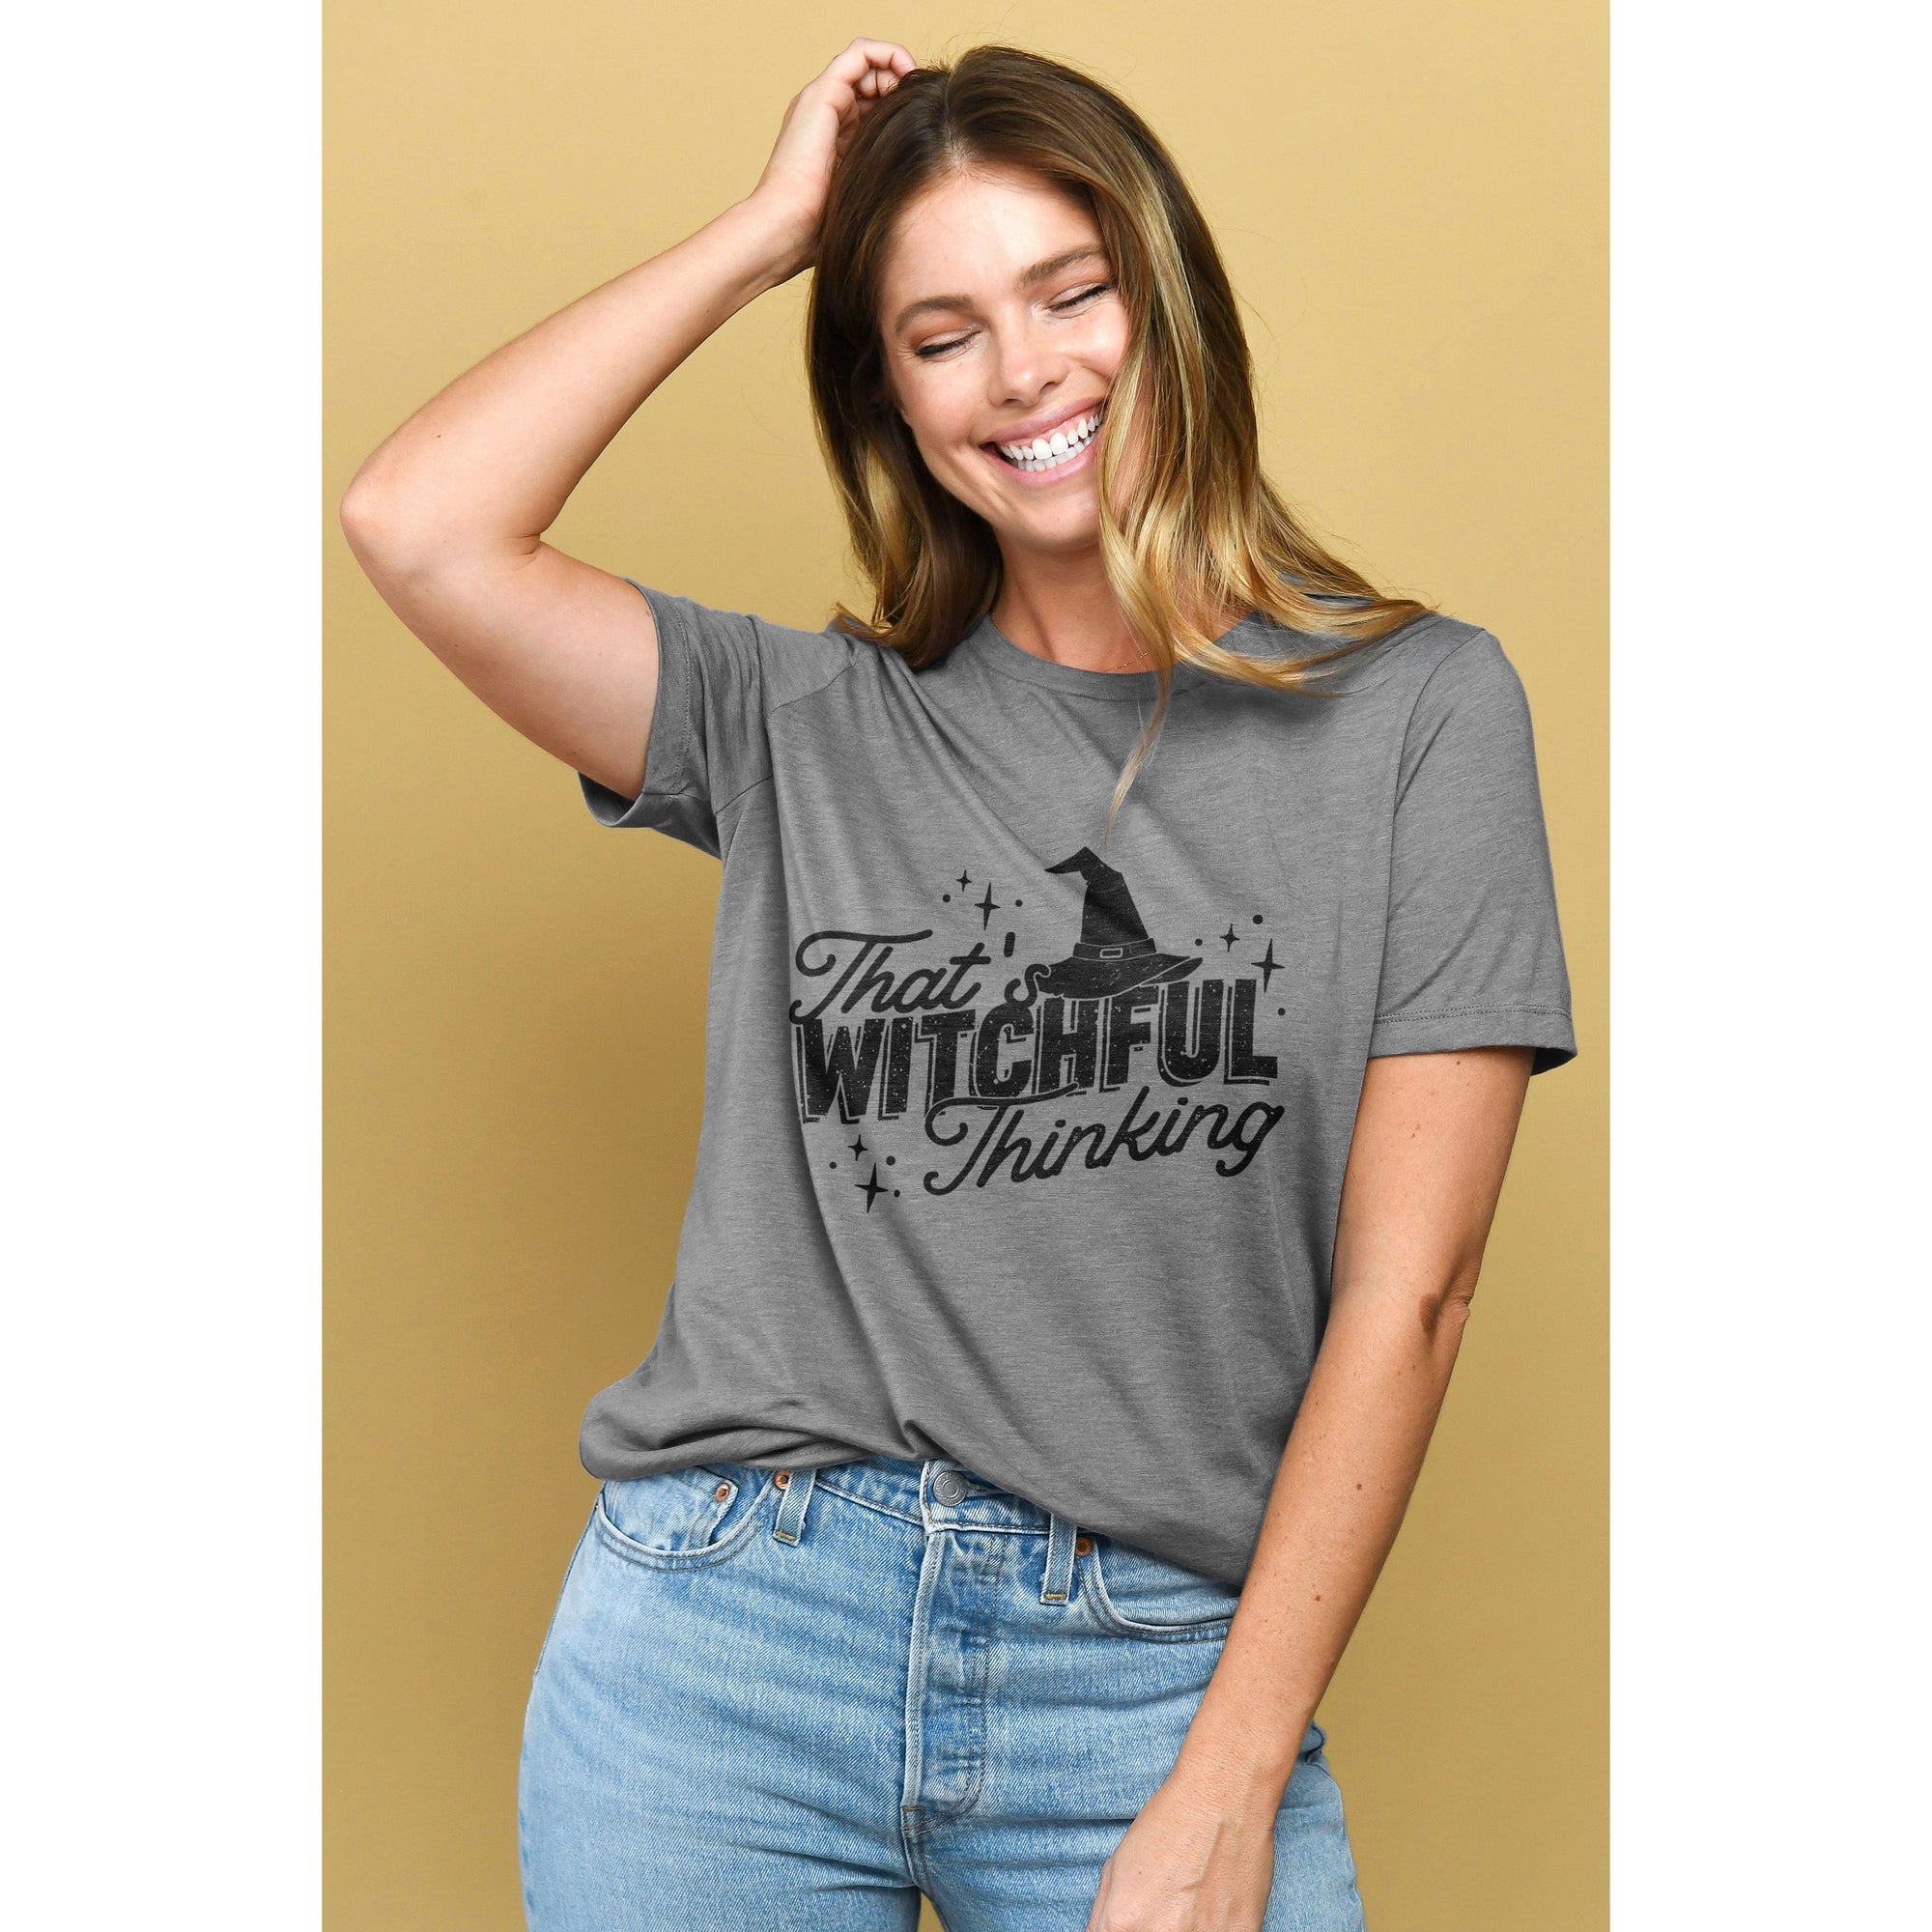 That's Witchful Thinking - thread tank | Stories you can wear.